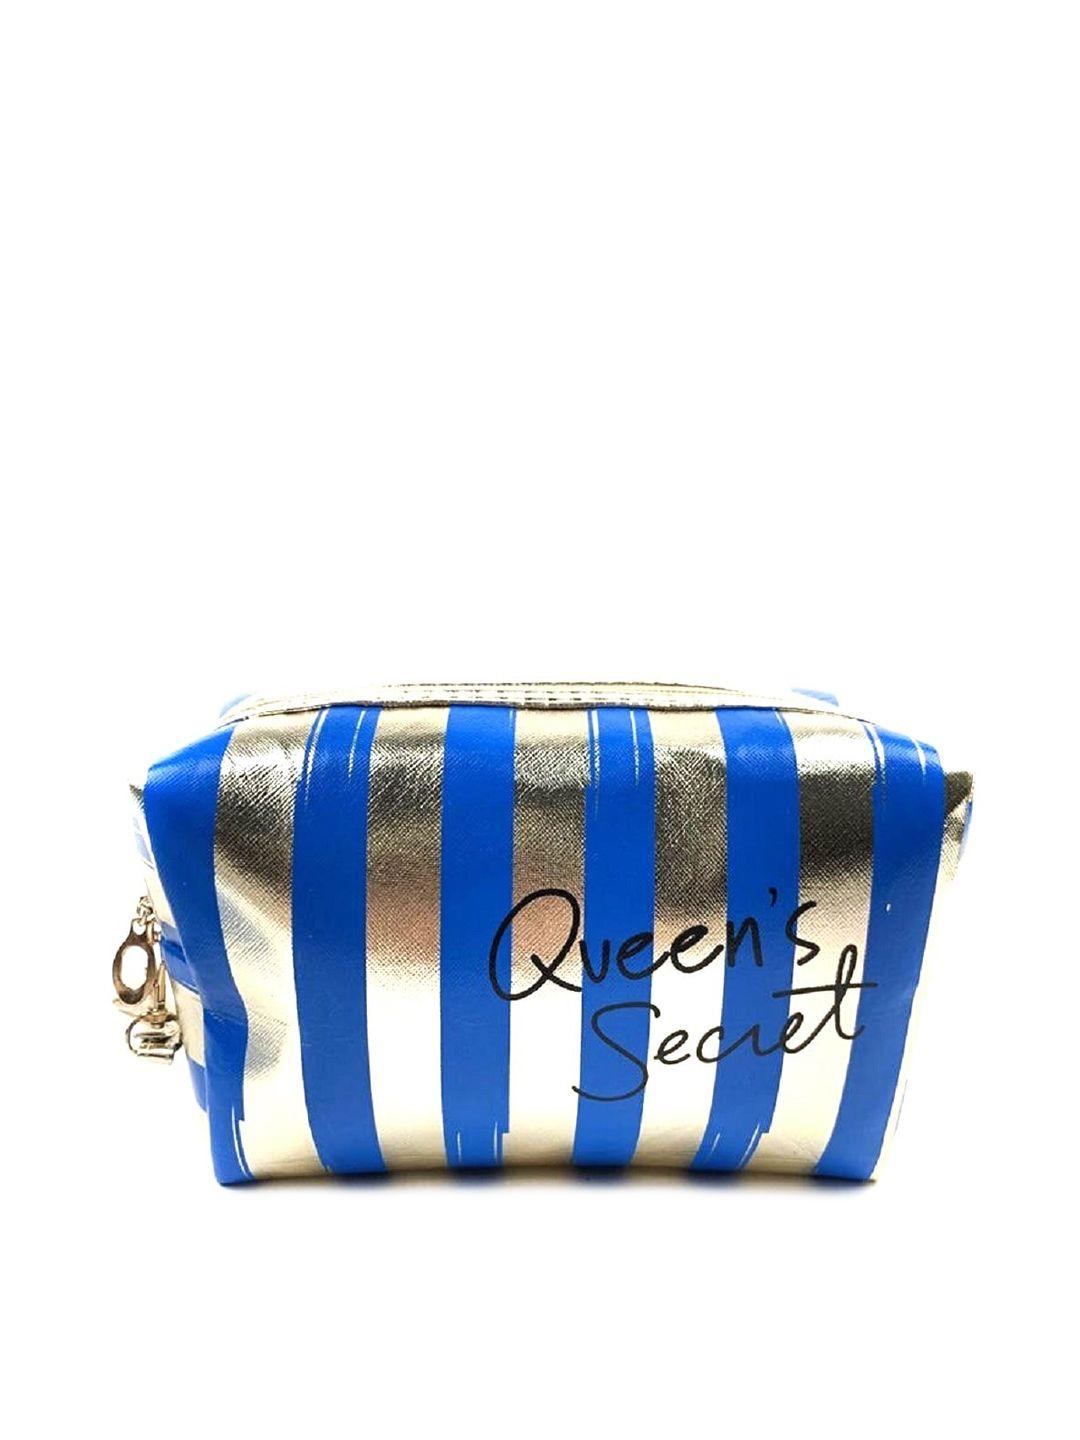 awestuffs adults blue & gold-toned striped travel pouch